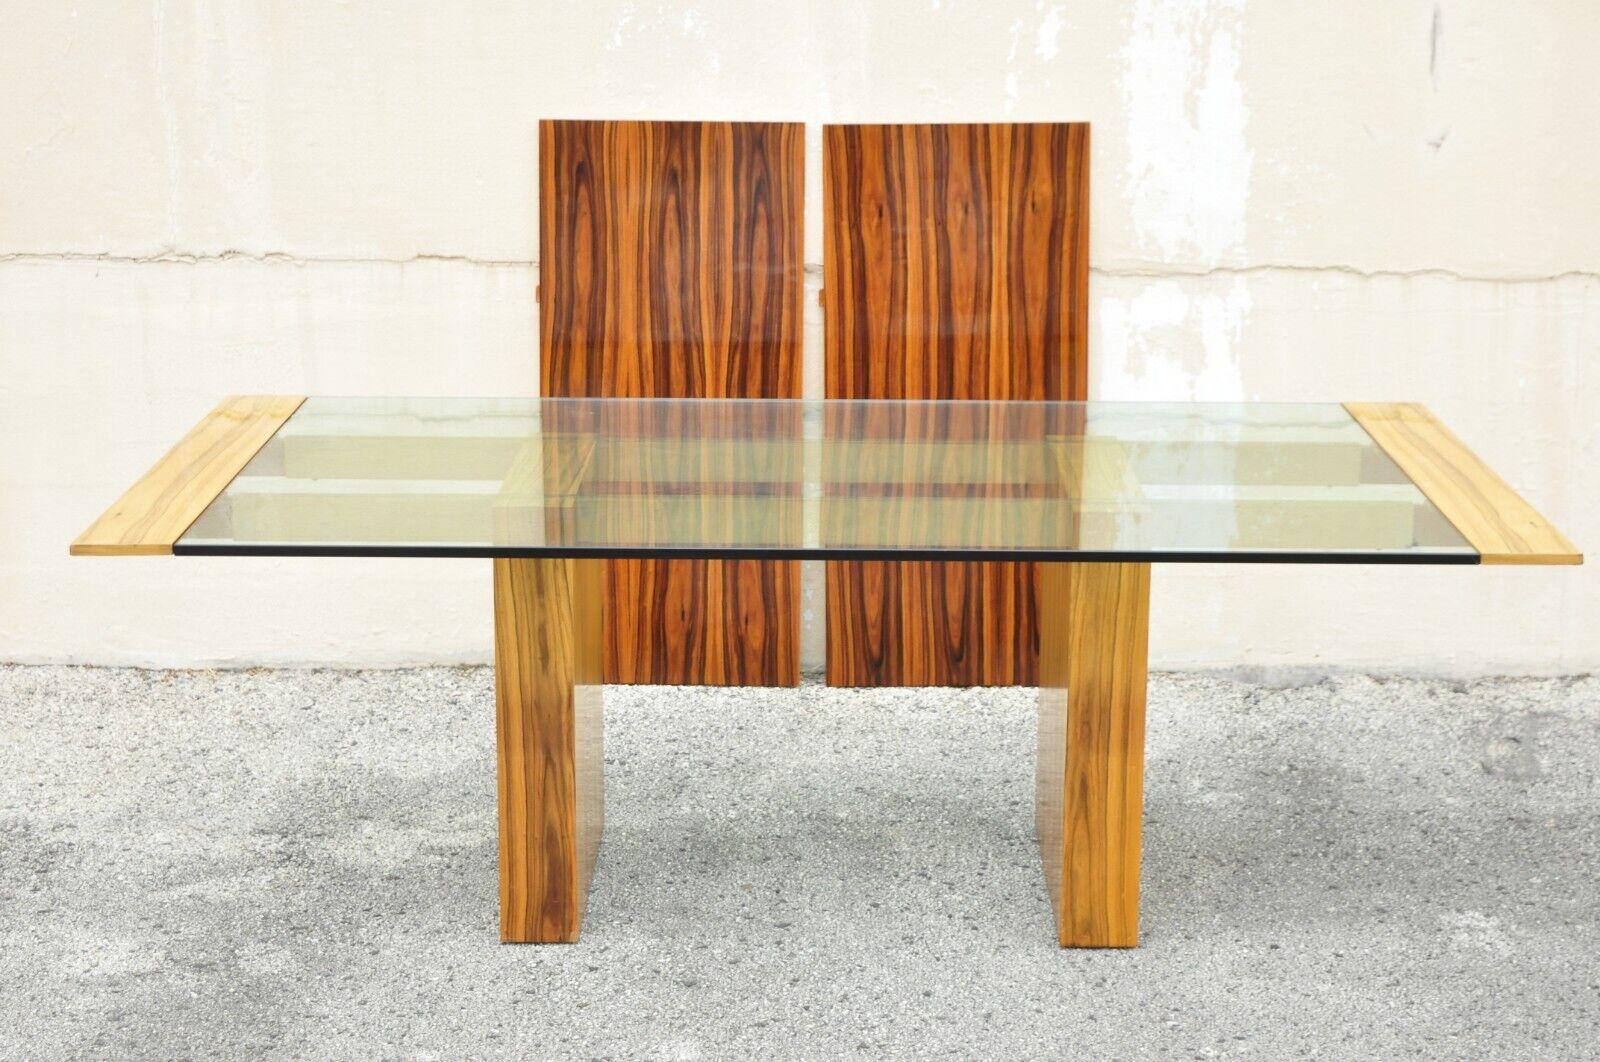 Lacquered Rosewood and Brass Cantilever Glass Top Extension Dining Table attributed to Vladimir Kagan. Item features a thick glass top, double pedestal base, brass/bronze supports and mounts, beautiful wood grain, clean Modernist lines, quality